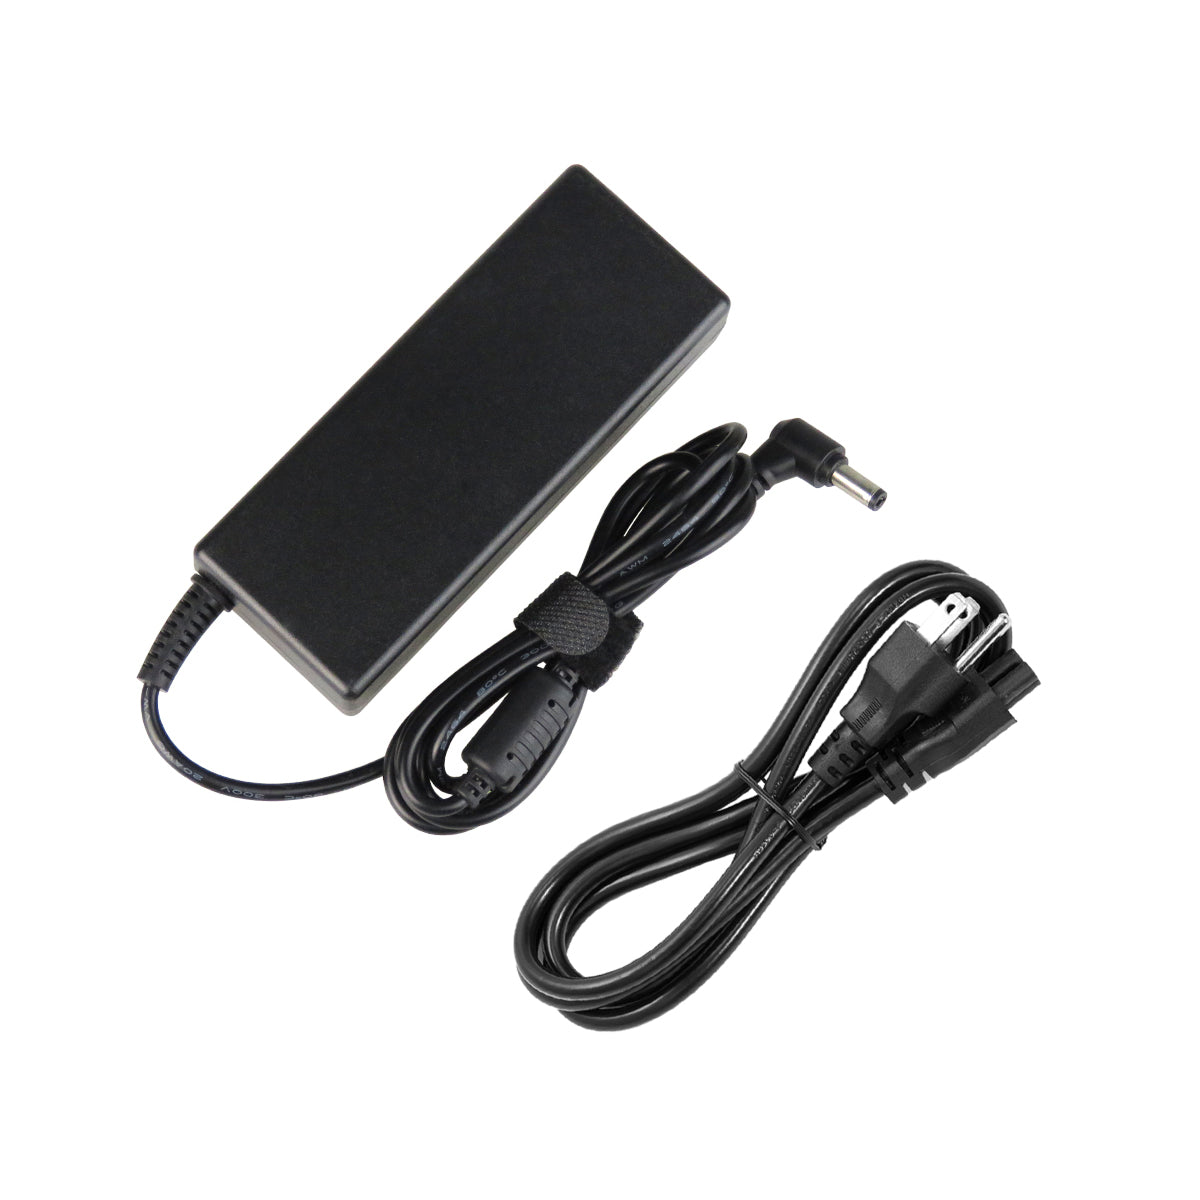 AC Adapter Charger for ASUS u50a Series Notebook.